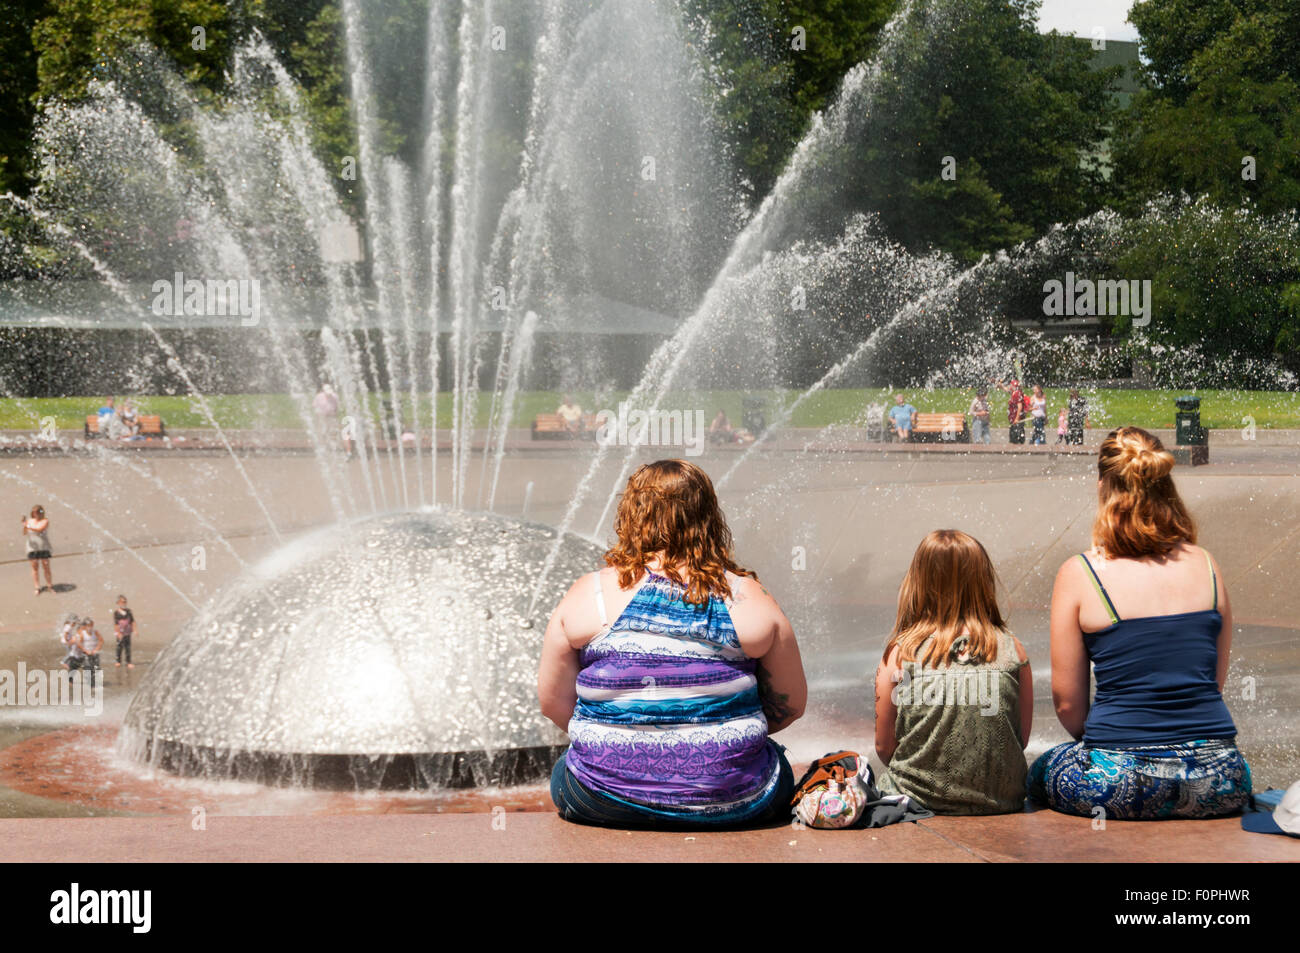 People watching the International Fountain at the Seattle Center. Stock Photo